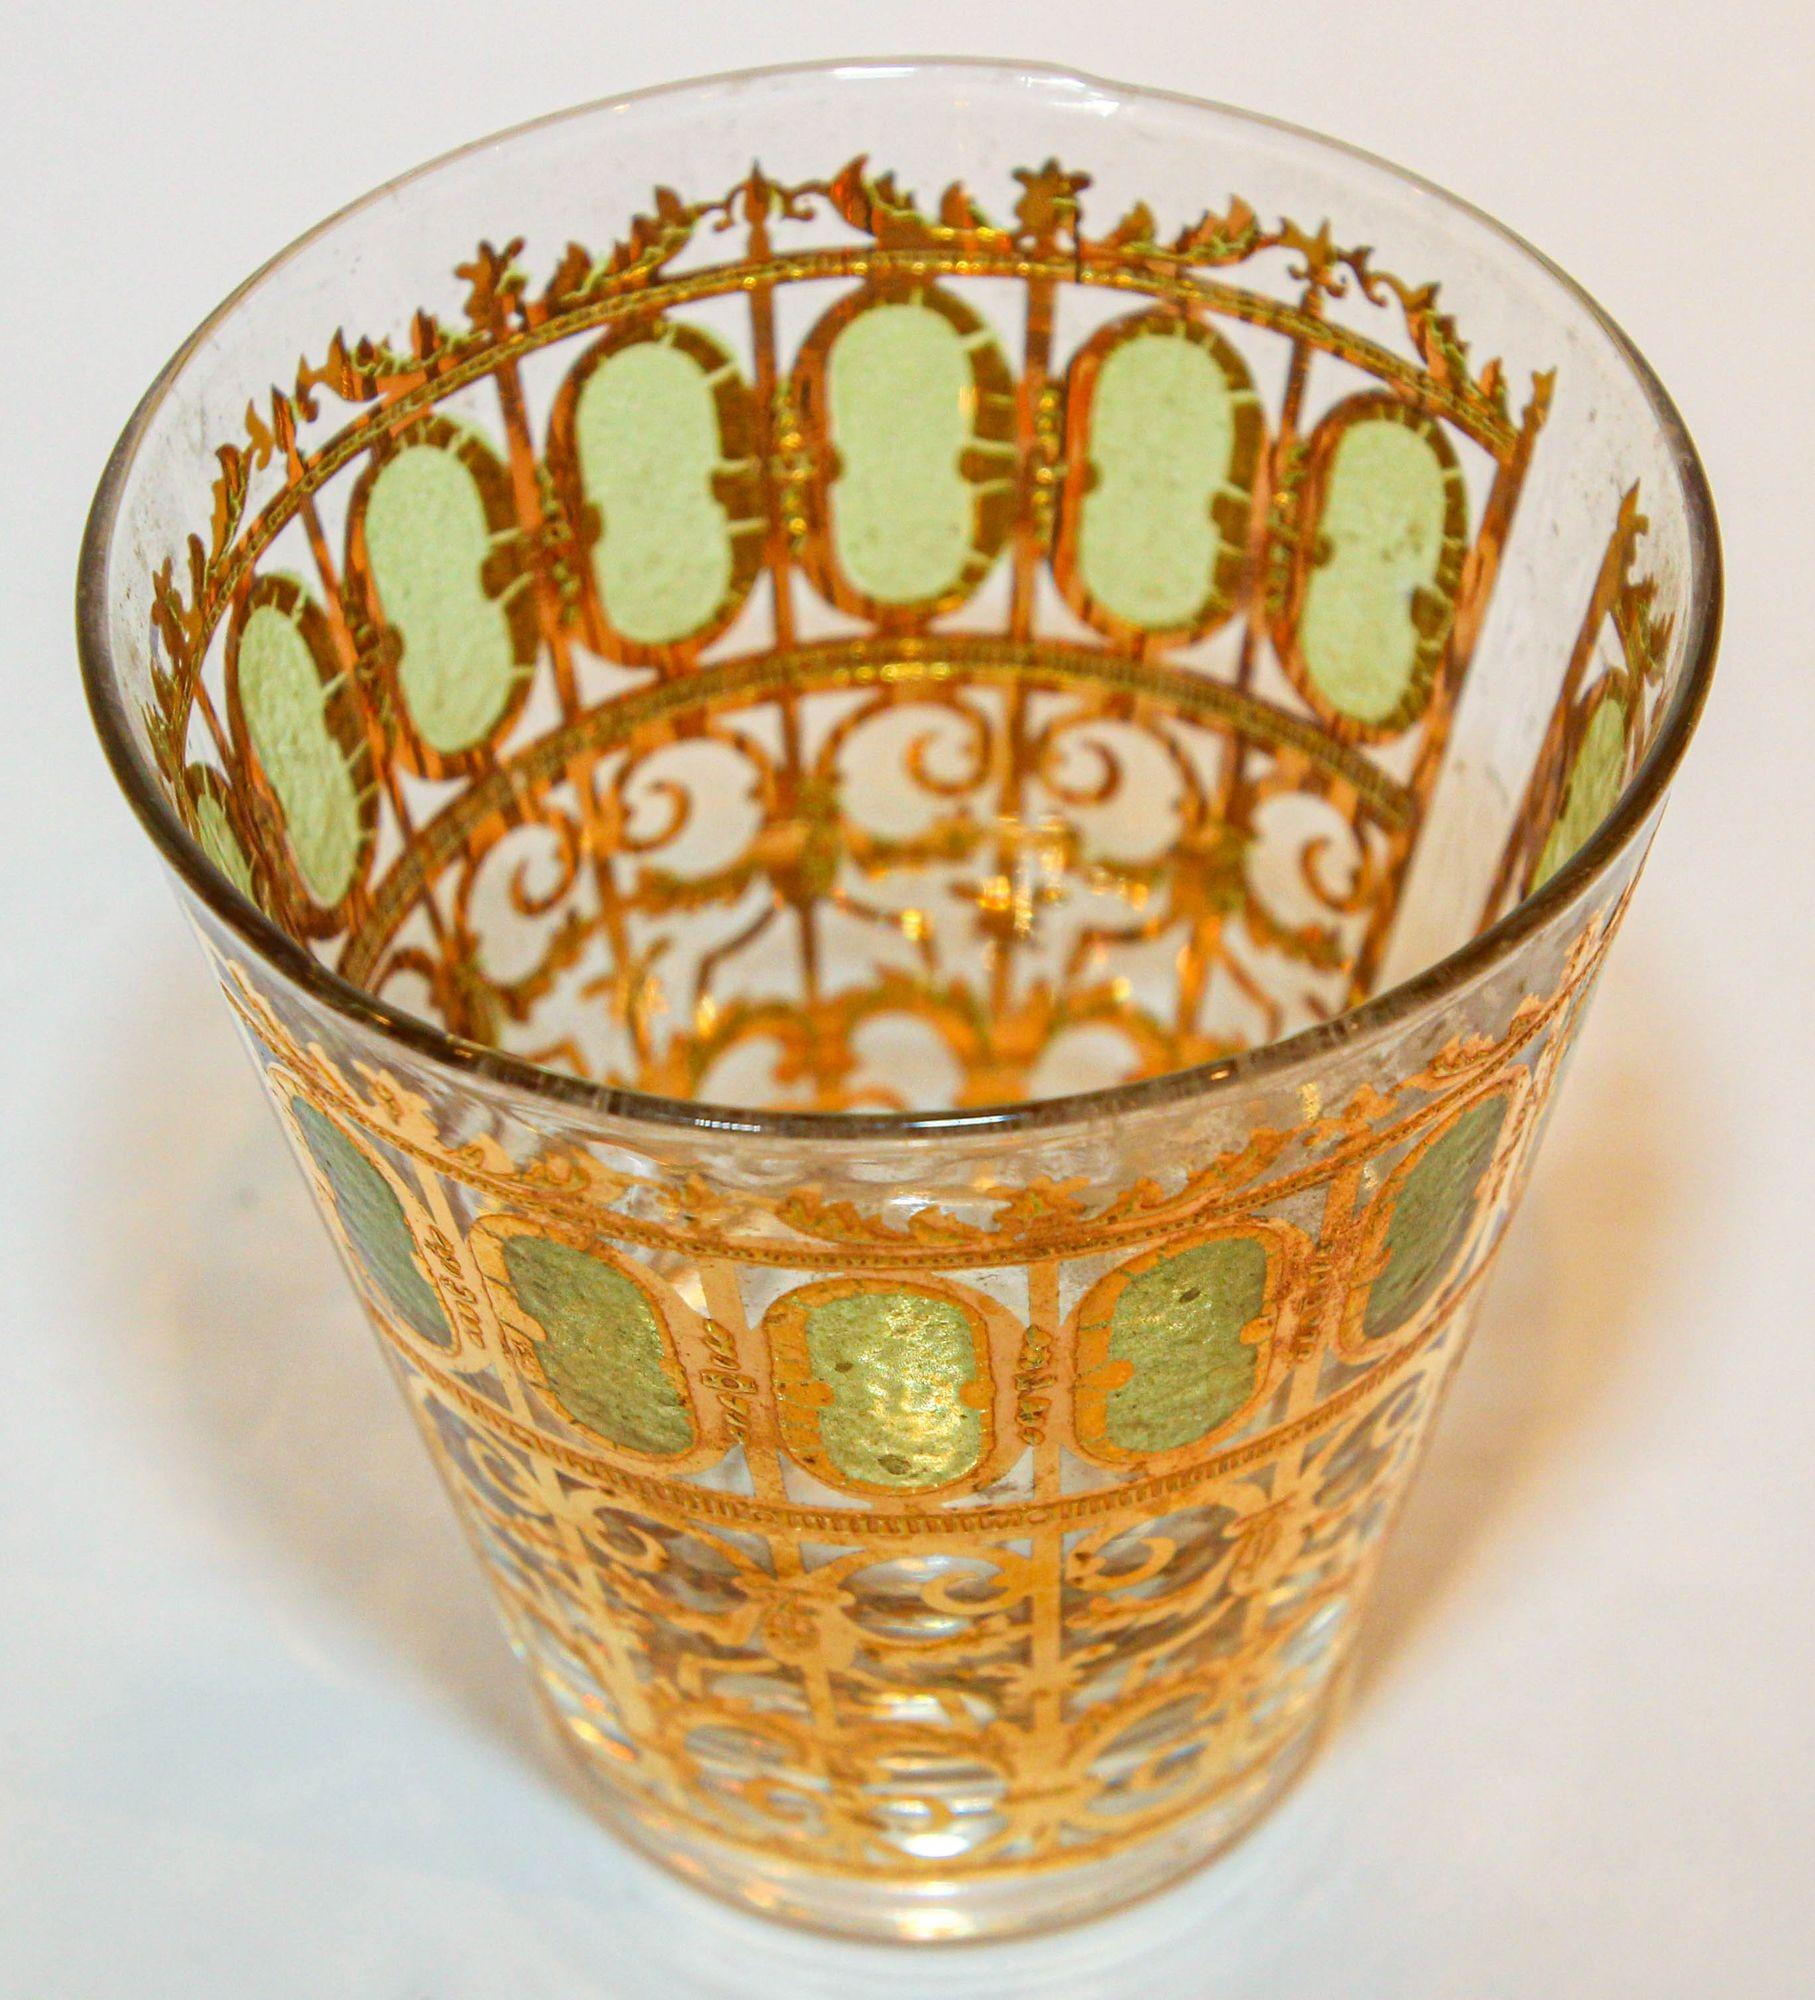 Mid-Century Culver Ltd Gold and Teal Green Vintage Rocks Single Glass With 22-Karat Gold Accents and Arched Window Pattern.
Vintage Culver Ltd Emerald Green Scroll double old fashioned glass with bright 22k gold trim. 
Collectible Valencia pattern